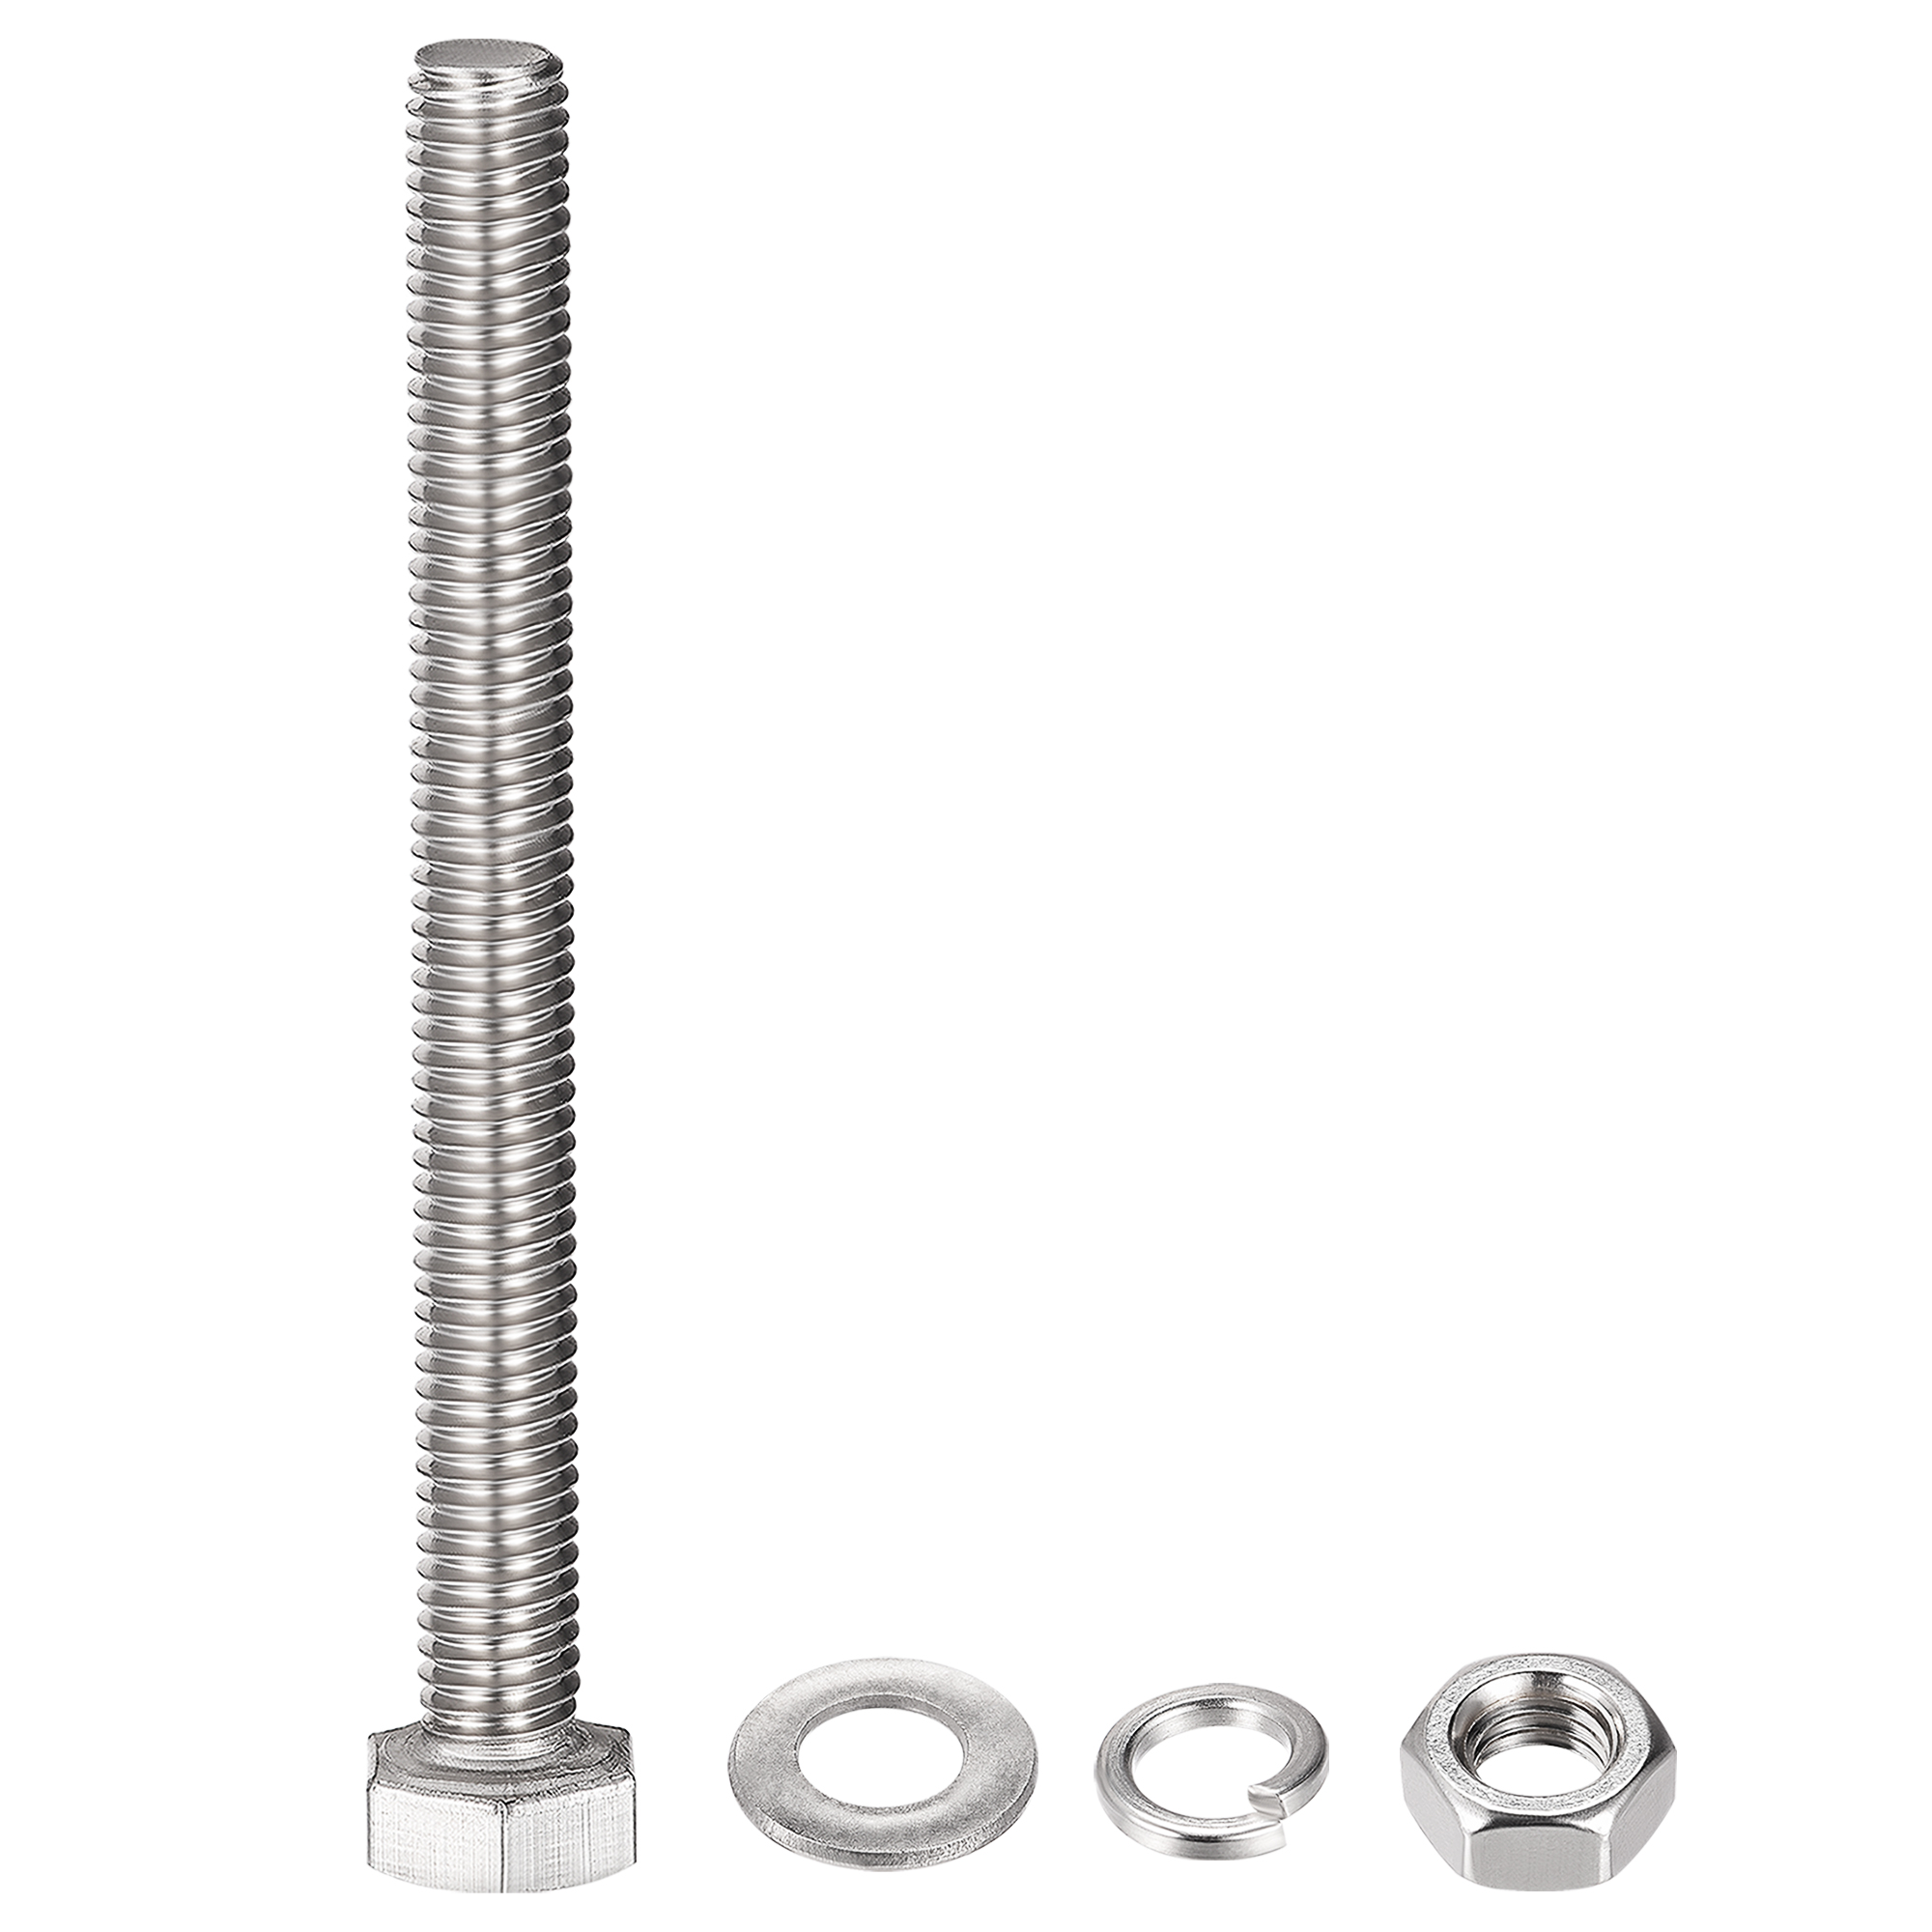 Uxcell M8 x 75mm 304 Stainless Steel Hex Head Screws Bolts, Nuts, Flat   Lock Washers Kits Sets